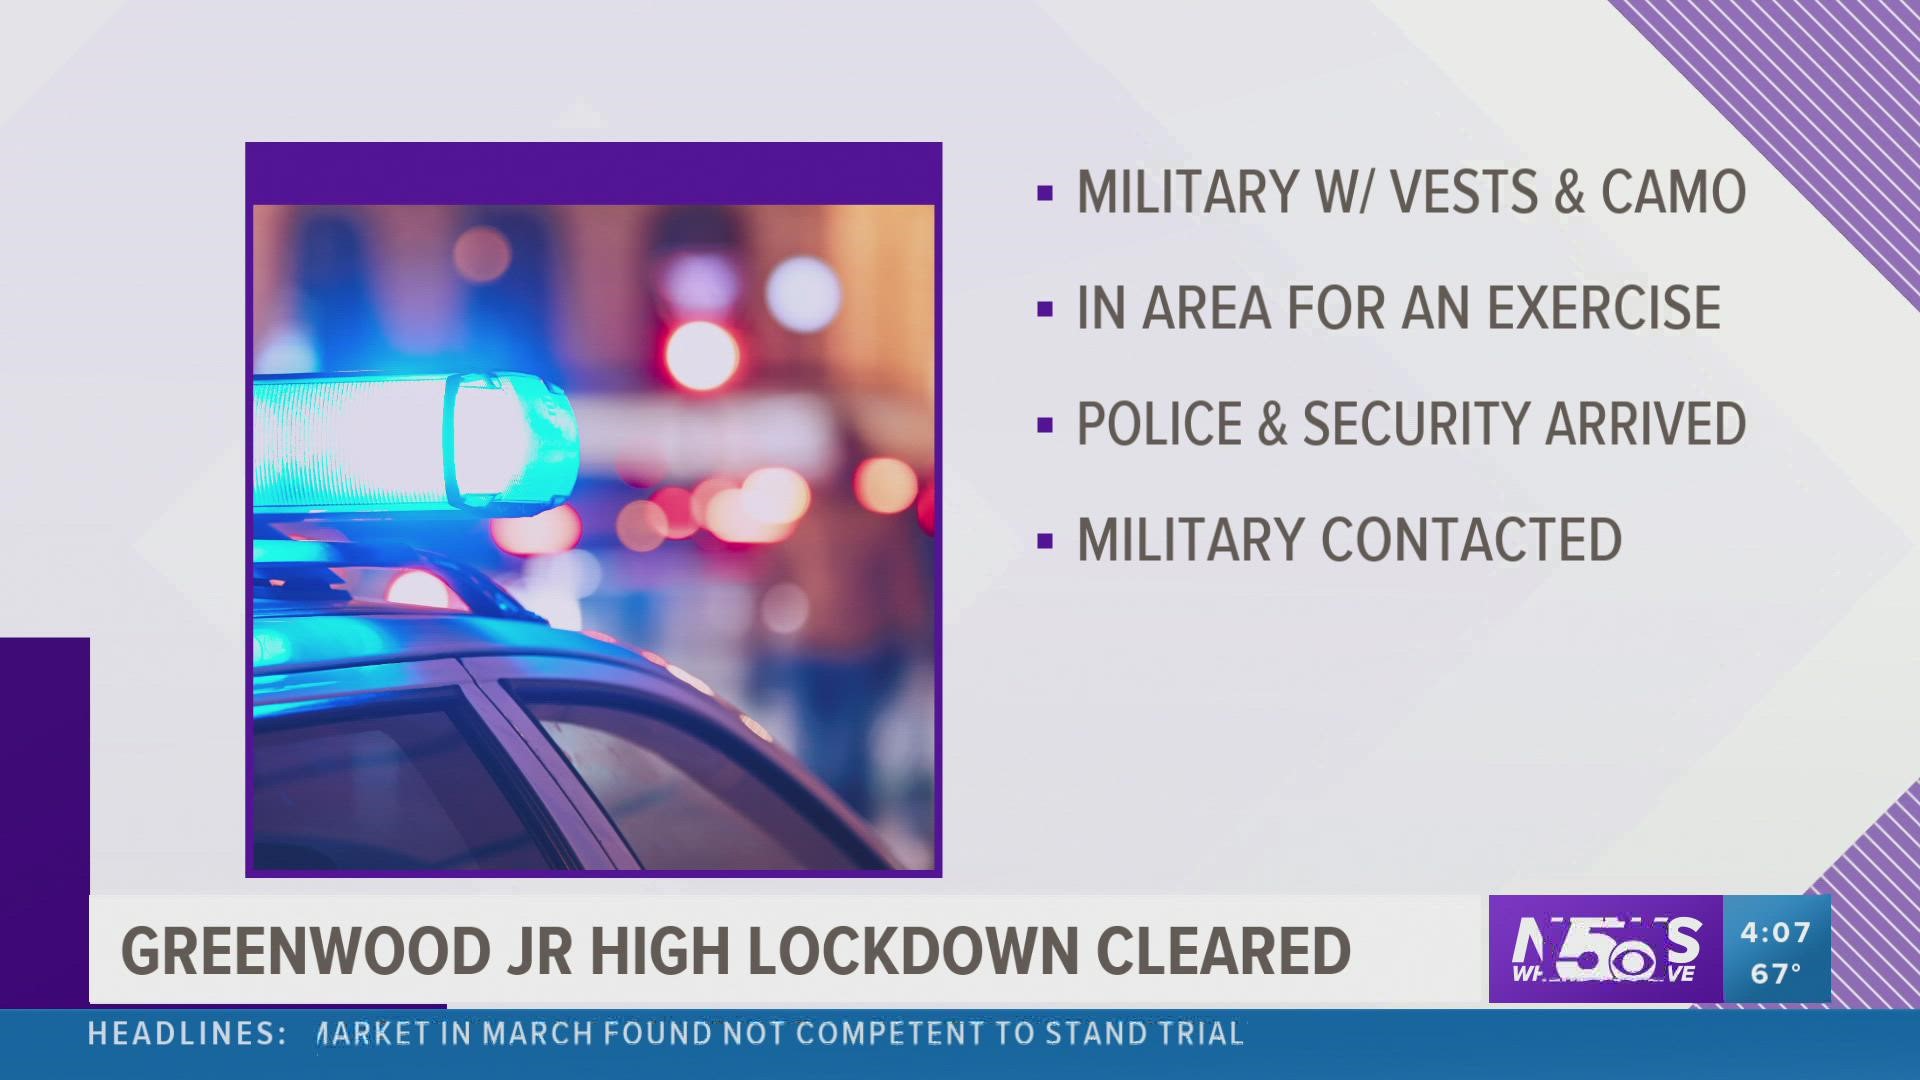 Greenwood Jr. High School went on a temporary lockdown Monday, Oct. 11, after a military training exercise.